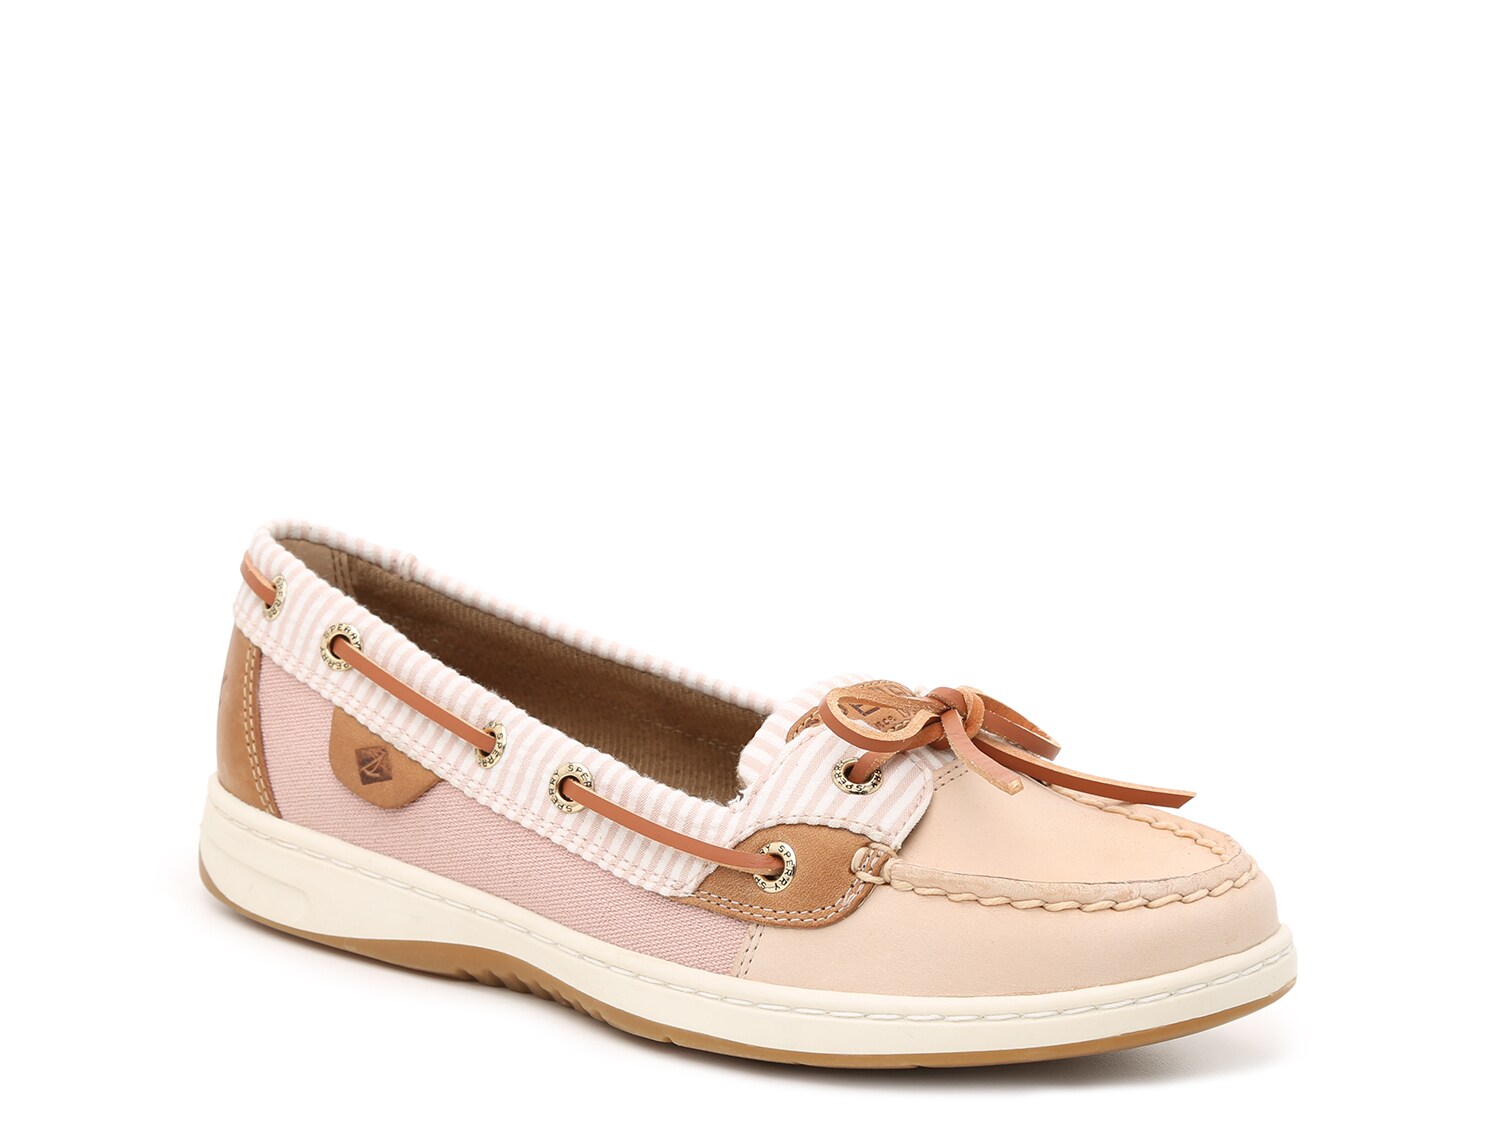 sperry shoes fashion